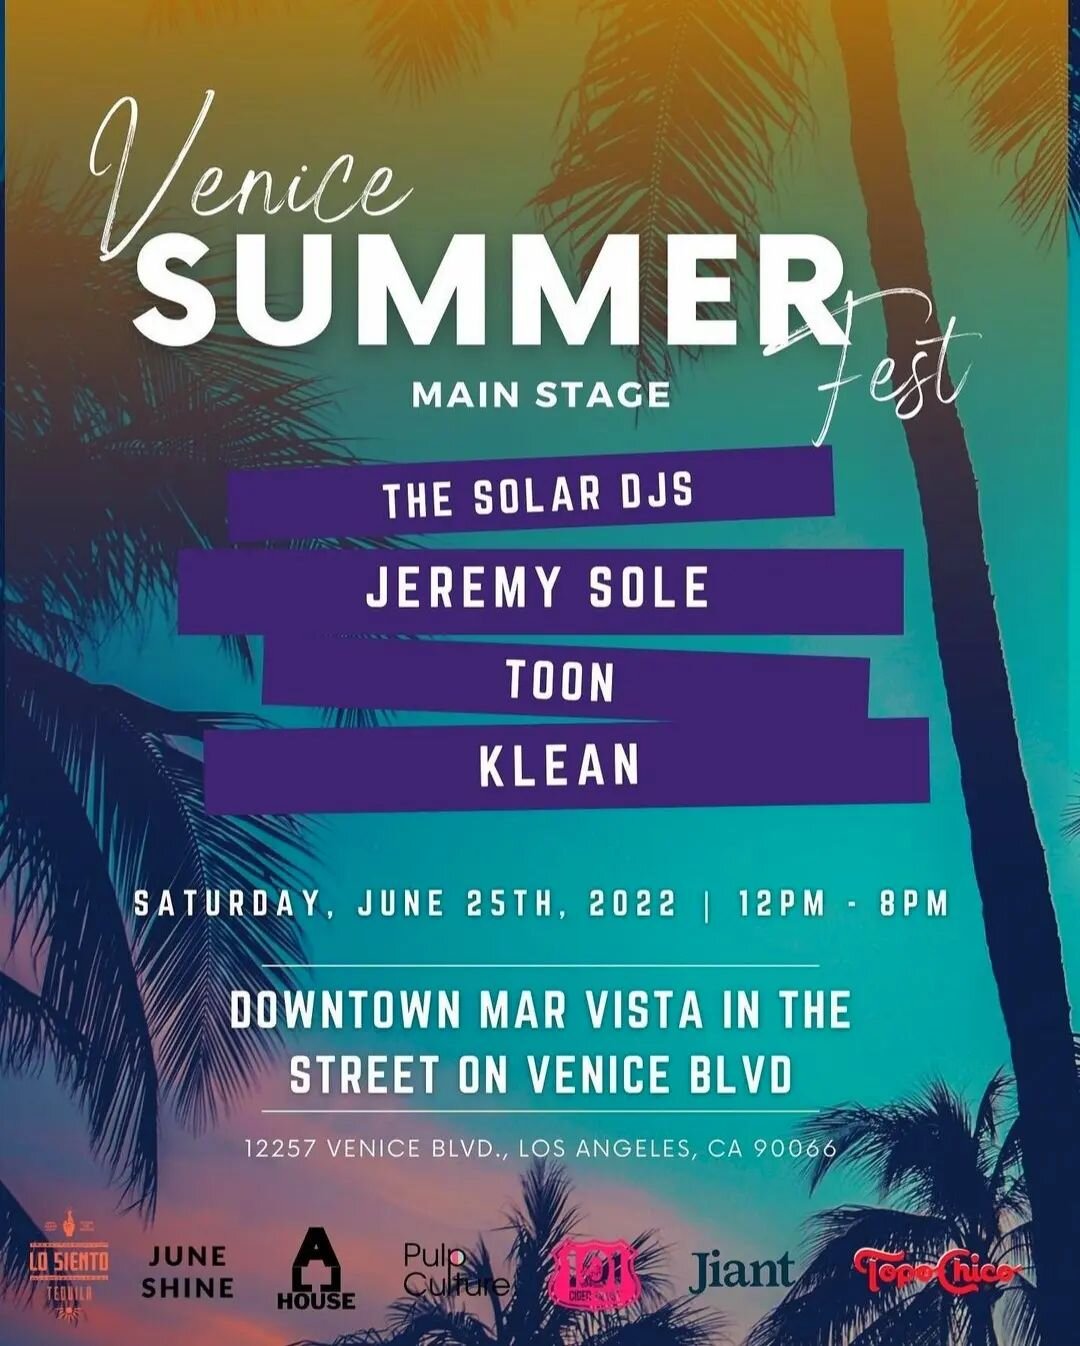 SUMMER is like OFFICIAL! #downtownmarvista #venicefest #openlate #party